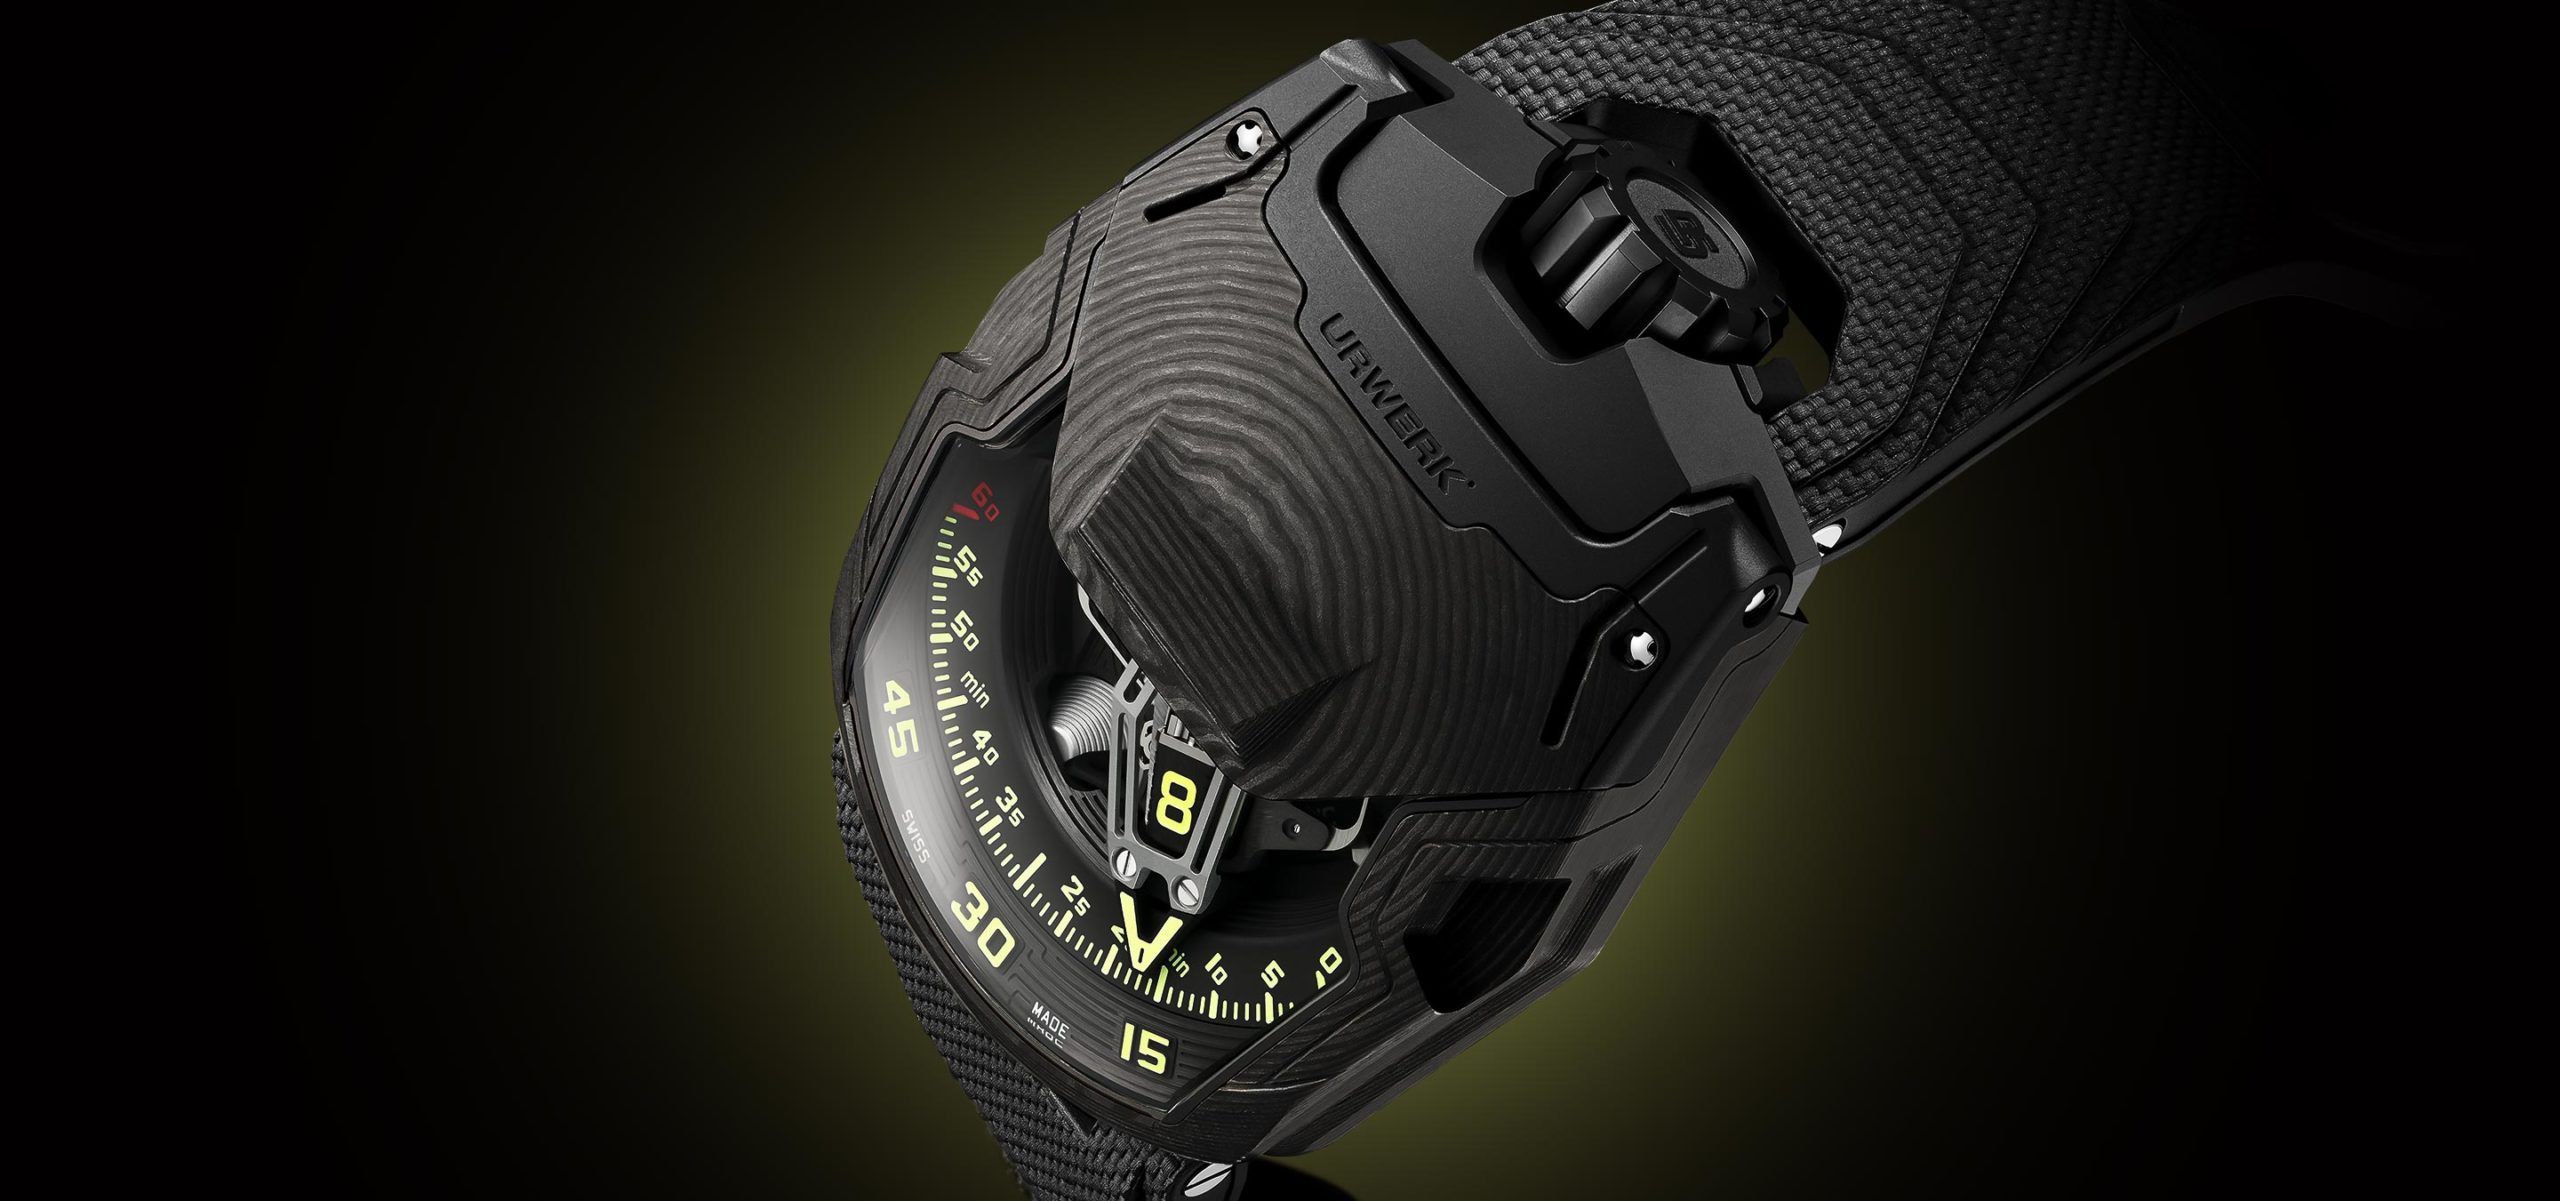 Earning Its Wings: Introducing The New Urwerk UR-230 ‘Eagle’